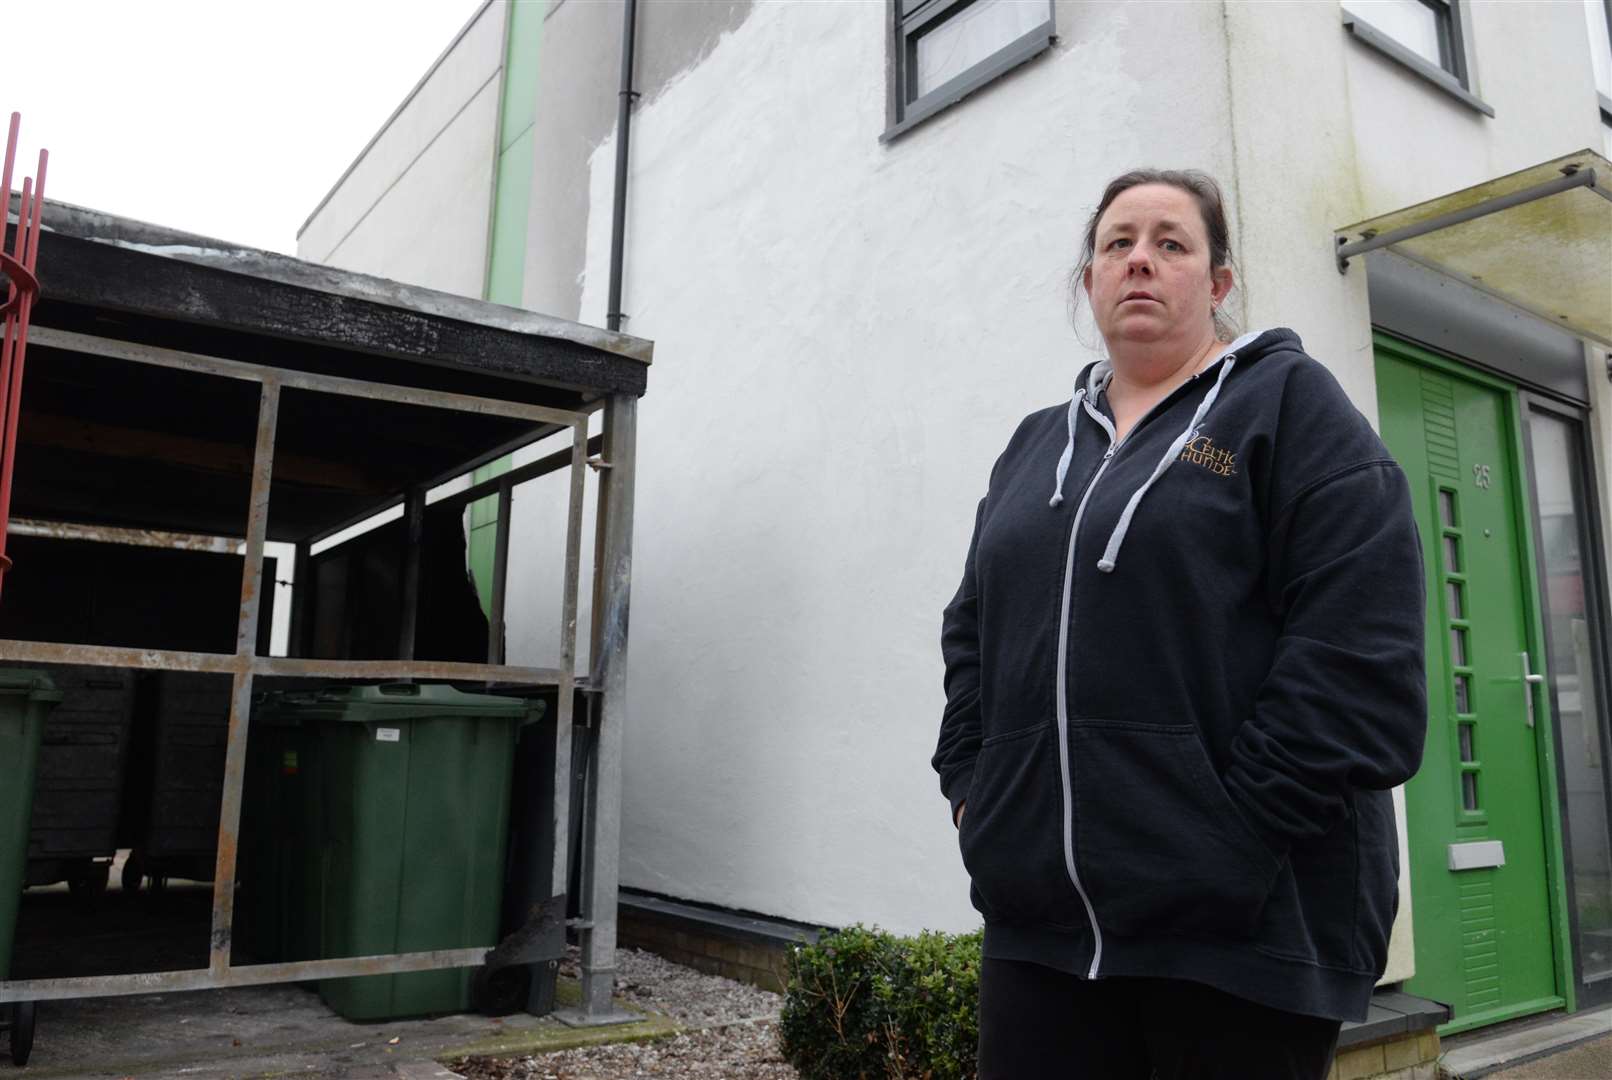 Sarah Jopson has spent months waiting for adequate repairs to her house